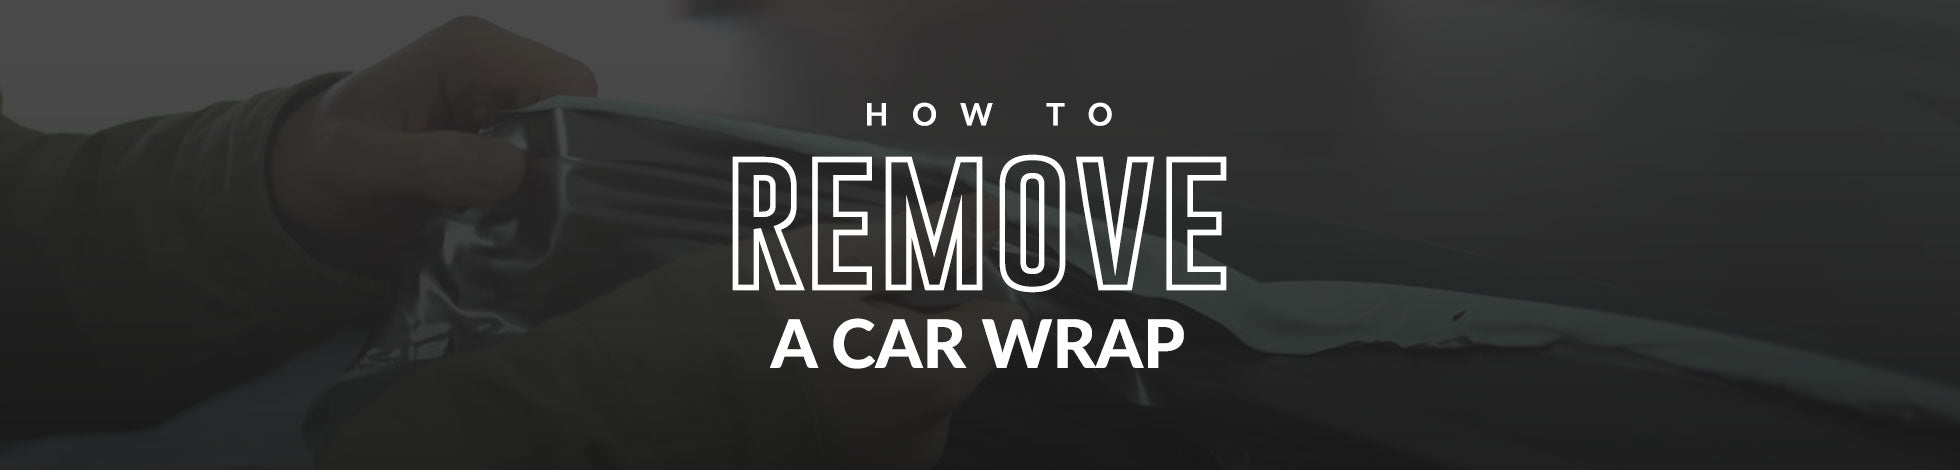 How to Remove the 3M Logo from Your Window Tint